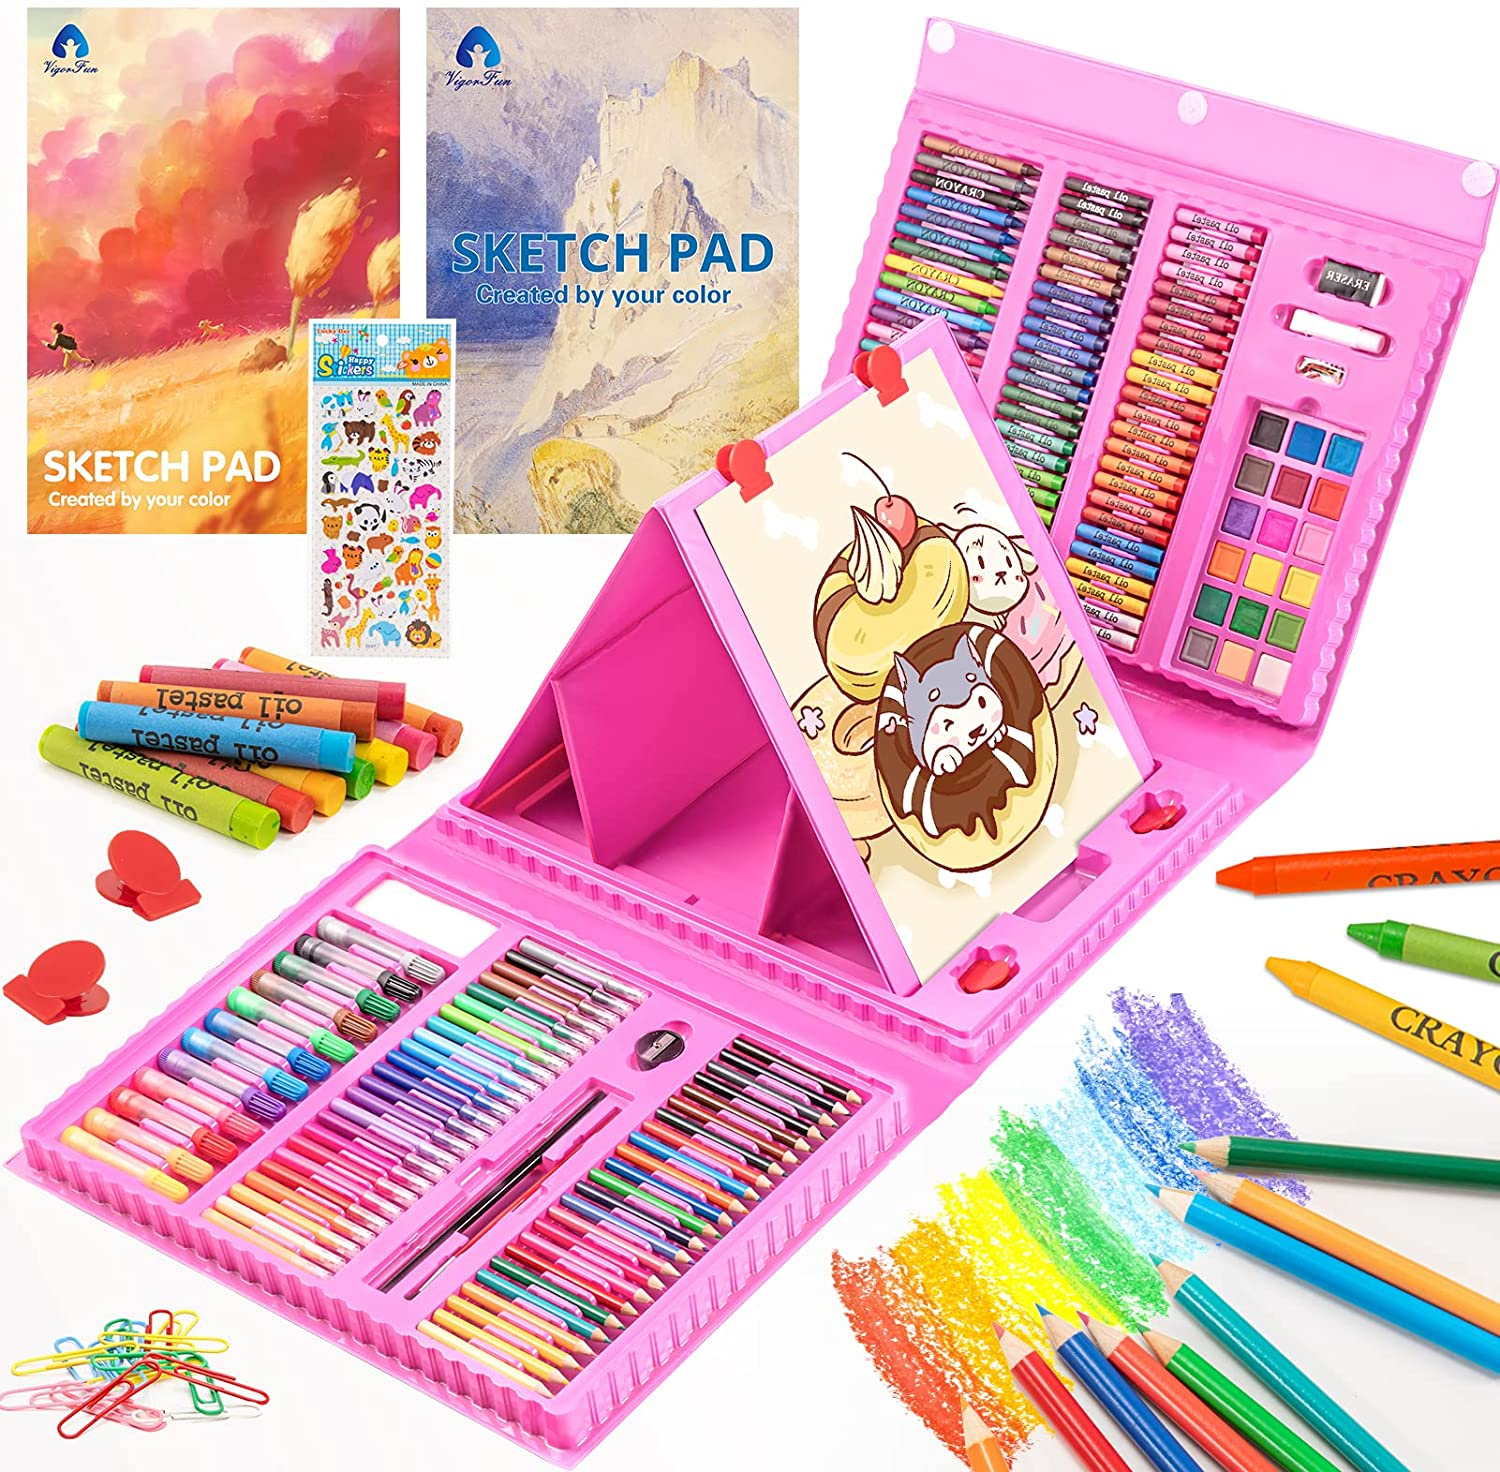 Art Supplies, 240-Piece Drawing Art Kit, Gifts Art Set Case with Double  Sided Trifold Easel, Includes Sketch Pads, Oil Pastels, Crayons, Colored